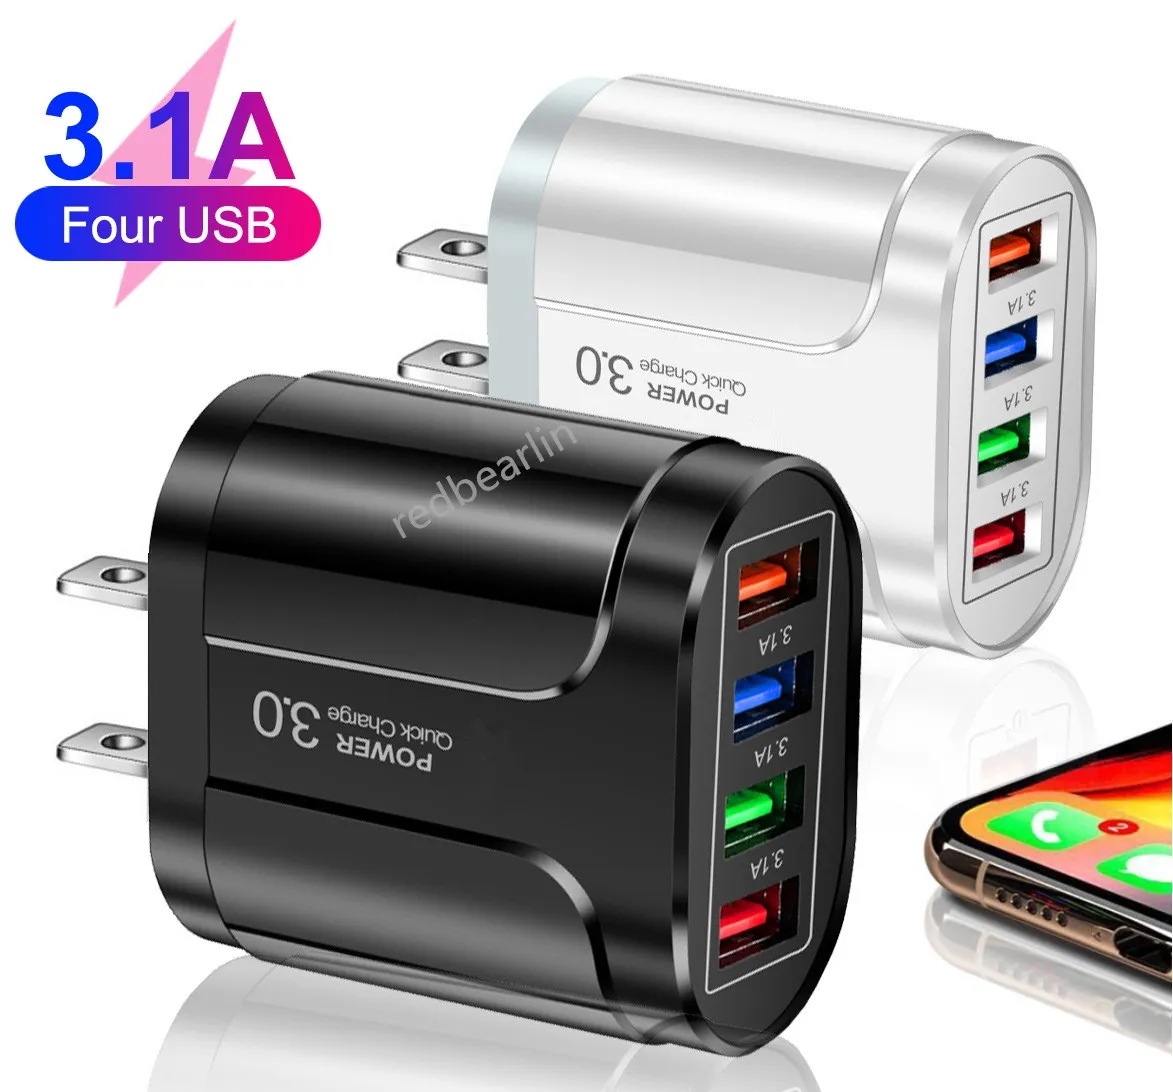 Quick Charging 4Usb Ports 3.1A Usb Wall Charger Portable Power Adapter Eu US Plugs For Iphone 13 14 15 pro Samsung Huawei Android phone